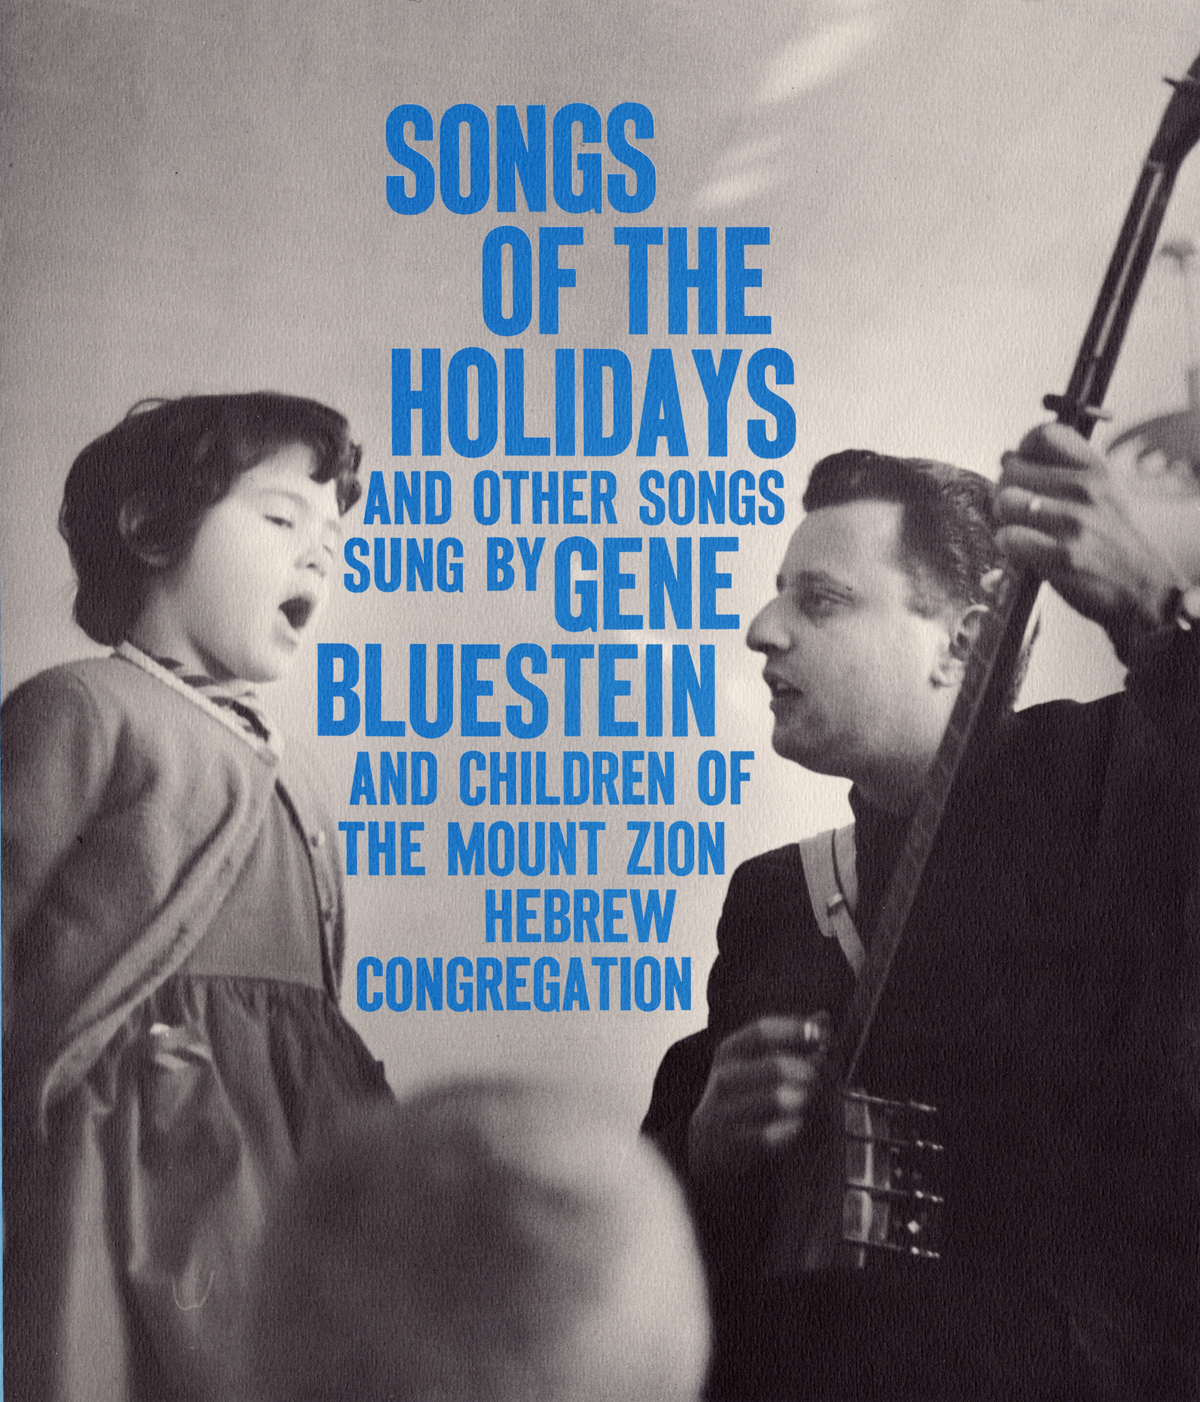 SONGS OF THE HOLIDAYS AND OTHER SONGS